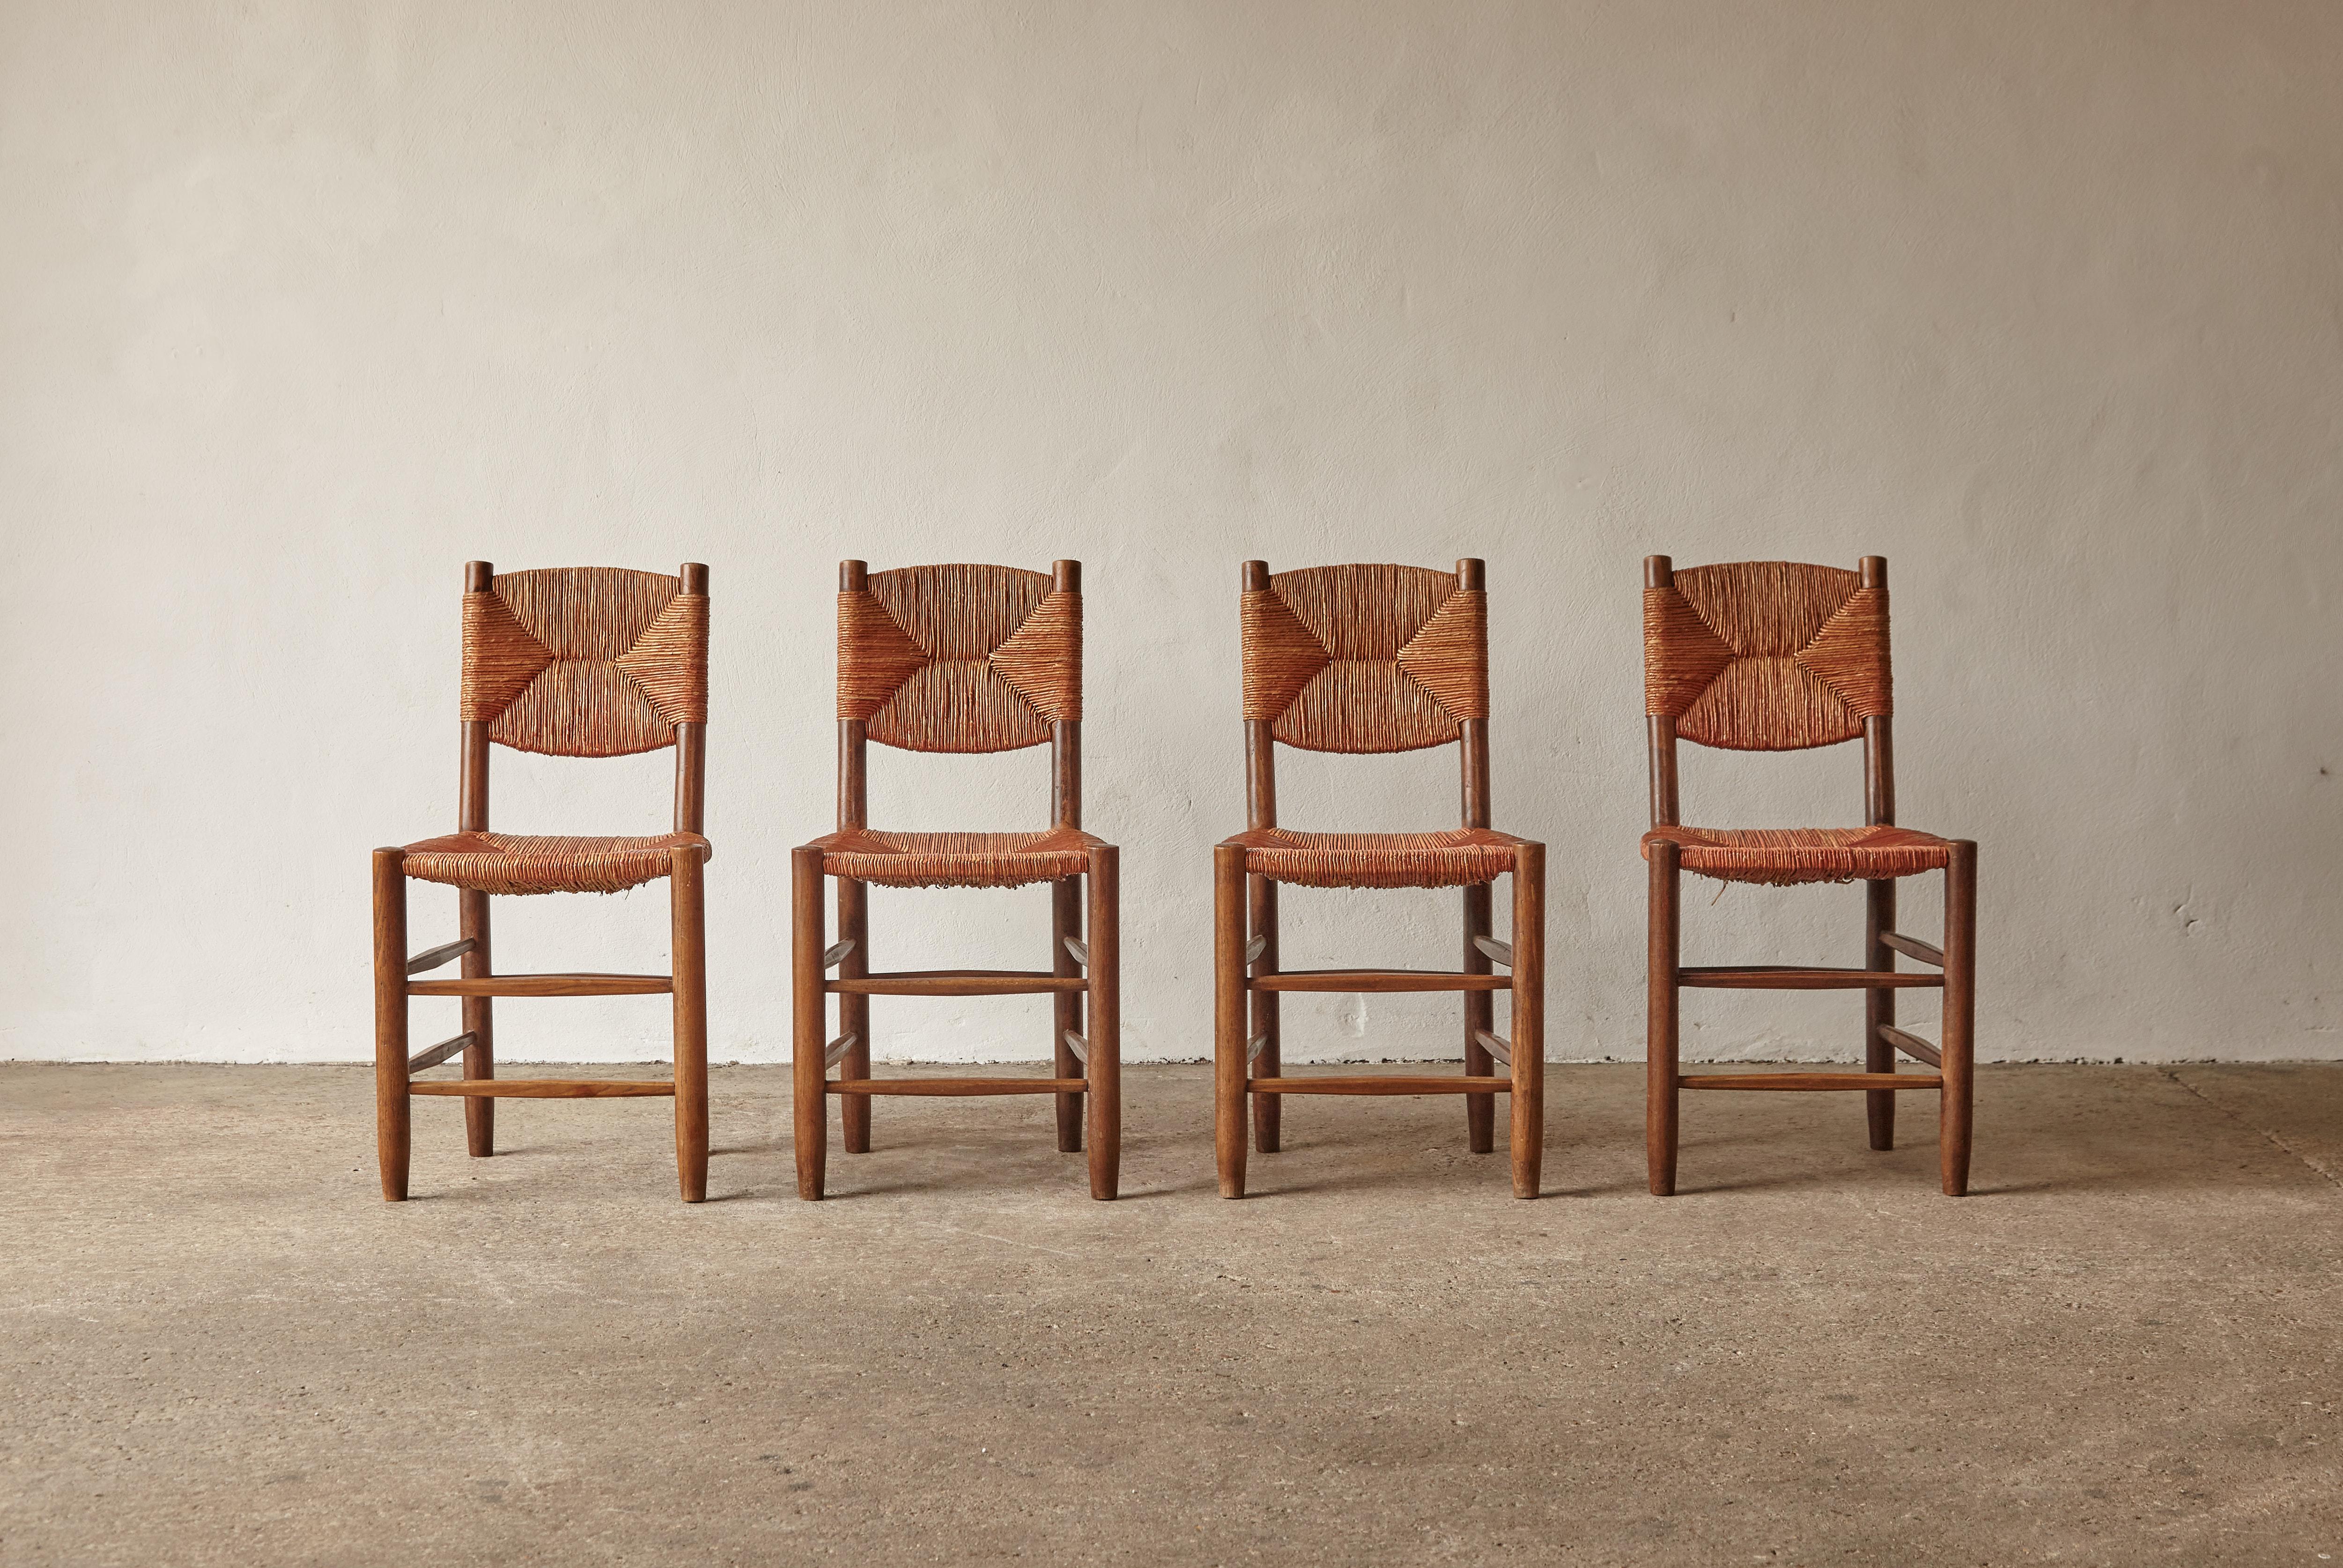 A superb set of Charlotte Perriand Model 19 Bauche chairs, France, 1950s/60s. This early set most likely produced by master cabinetmaker Andre Chetaille at Steph Simon. In original condition and very rarely found with original cordon intact. Good